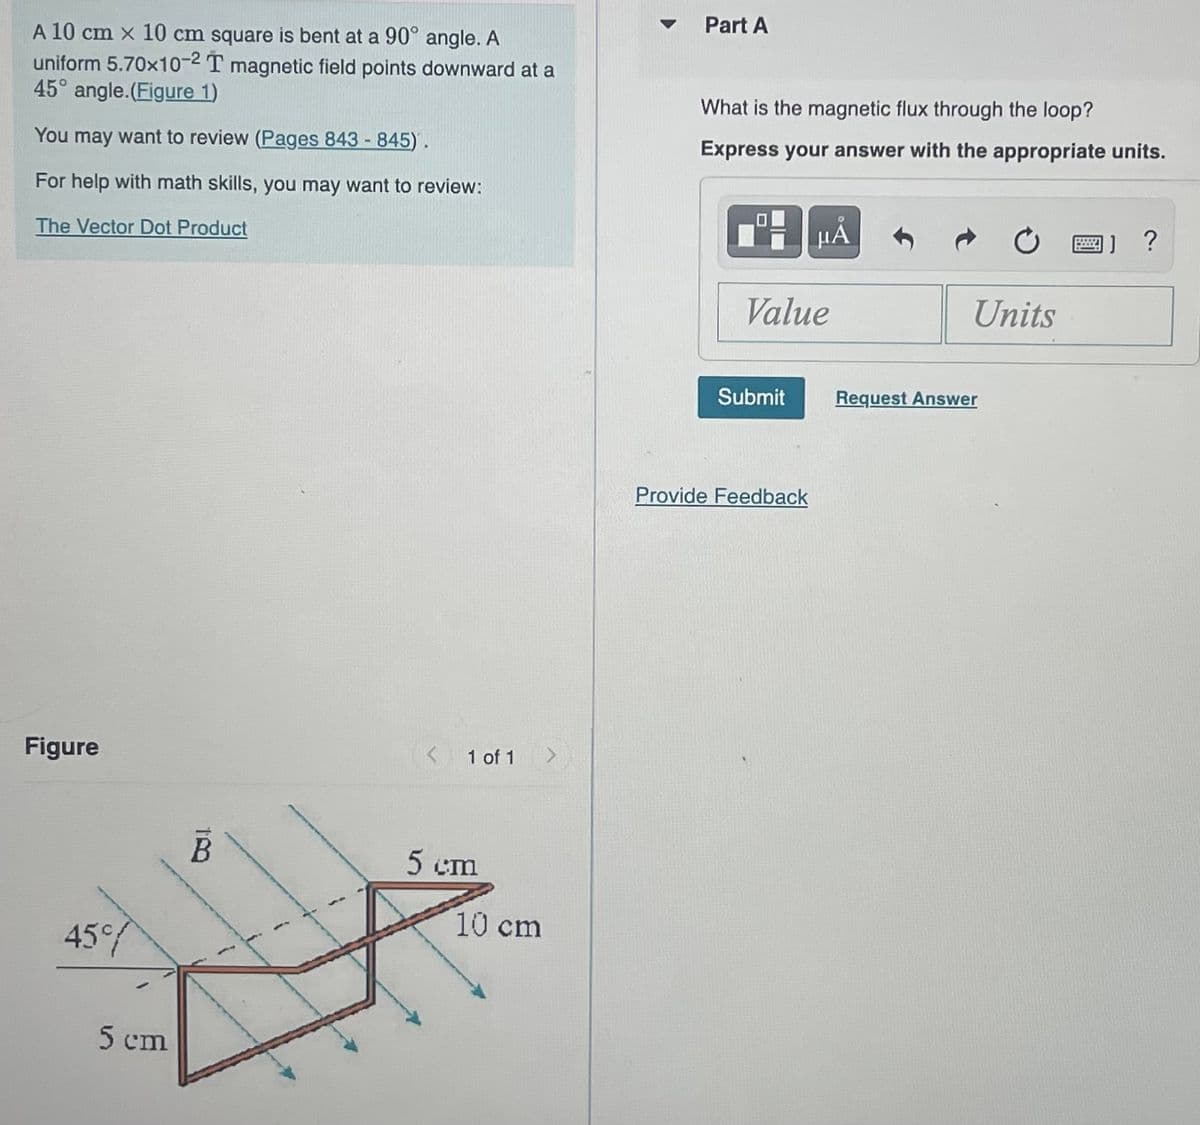 A 10 cm x 10 cm square is bent at a 90° angle. A
uniform 5.70x10-2 T magnetic field points downward at a
45° angle.(Figure 1)
You may want to review (Pages 843-845).
For help with math skills, you may want to review:
The Vector Dot Product
Figure
45%
5 cm
18
B
1
1 of 1
5 cm
10 cm
Part A
What is the magnetic flux through the loop?
Express your answer with the appropriate units.
Value
Submit
HÅ
Provide Feedback
Units
Request Answer
□】?